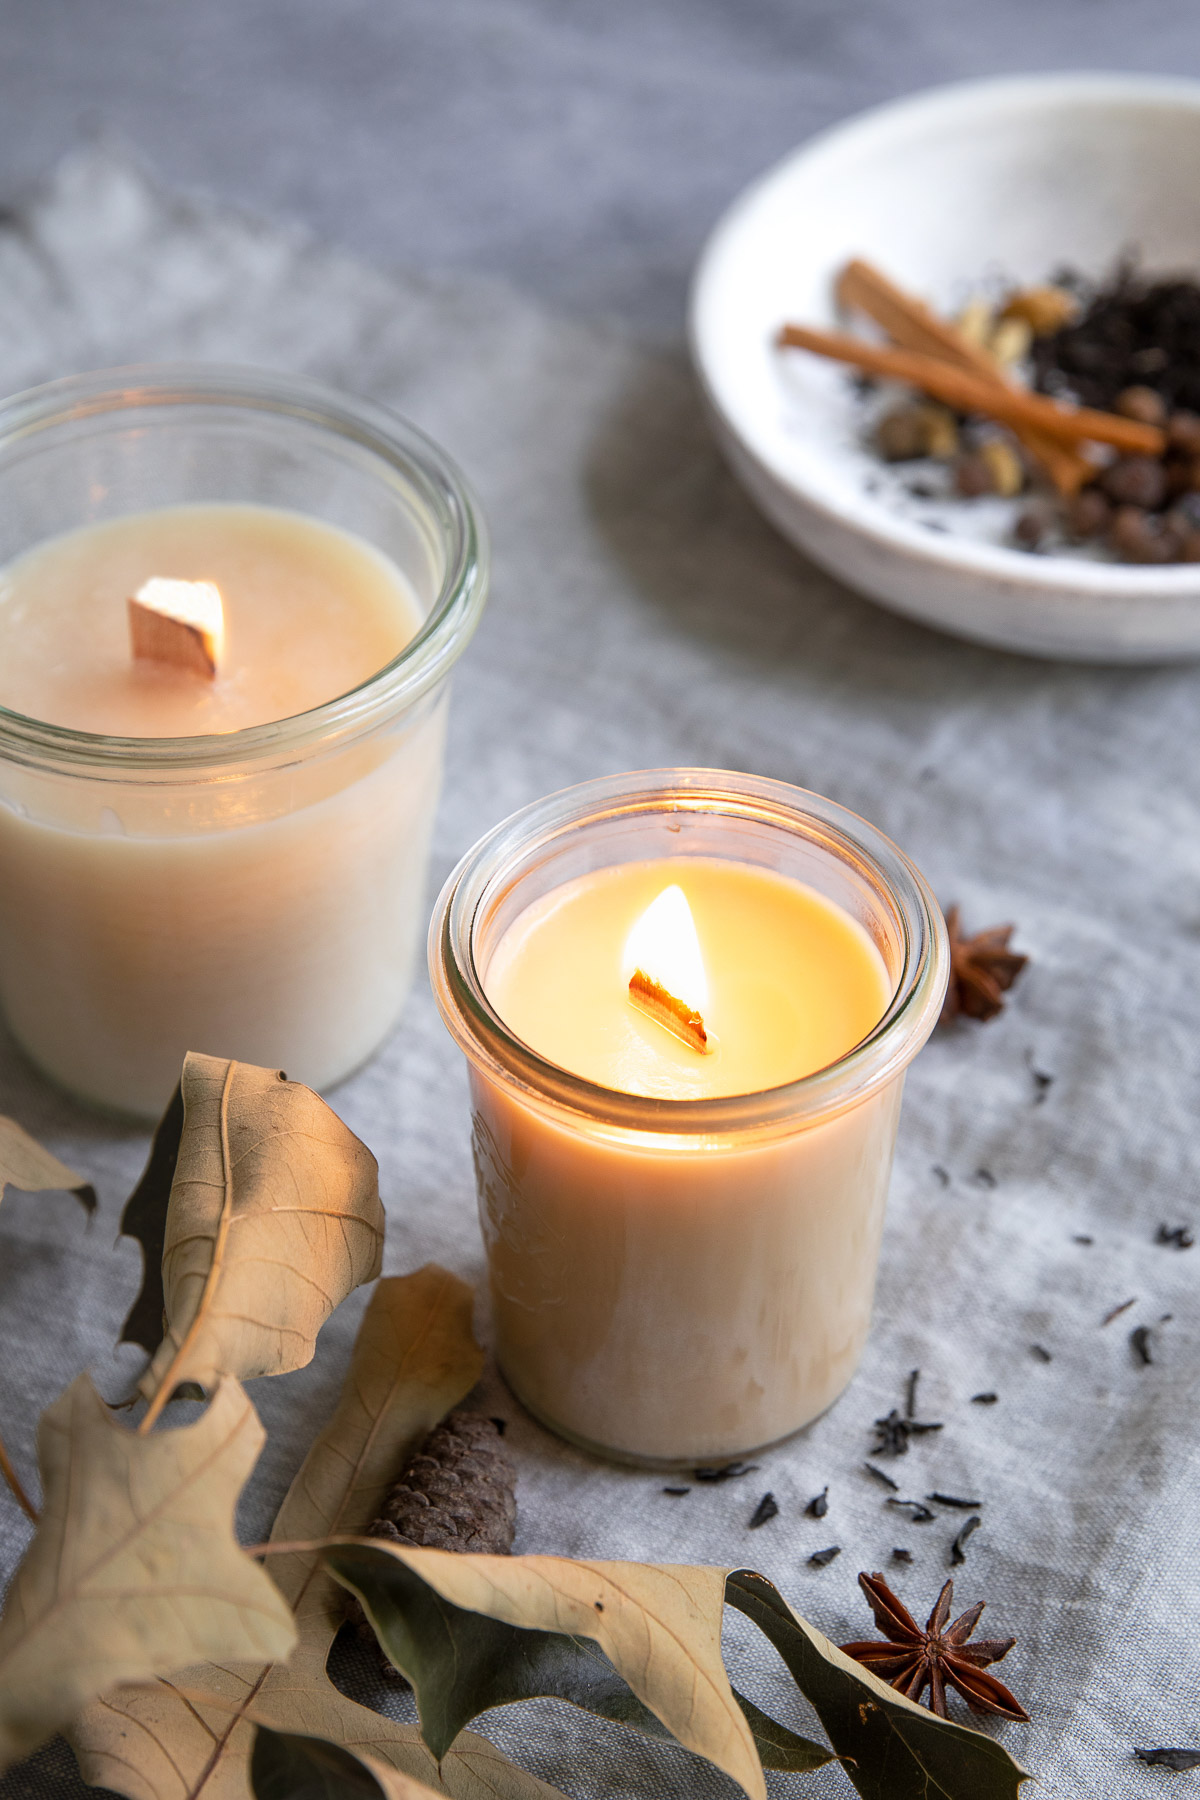 How to make infused candles